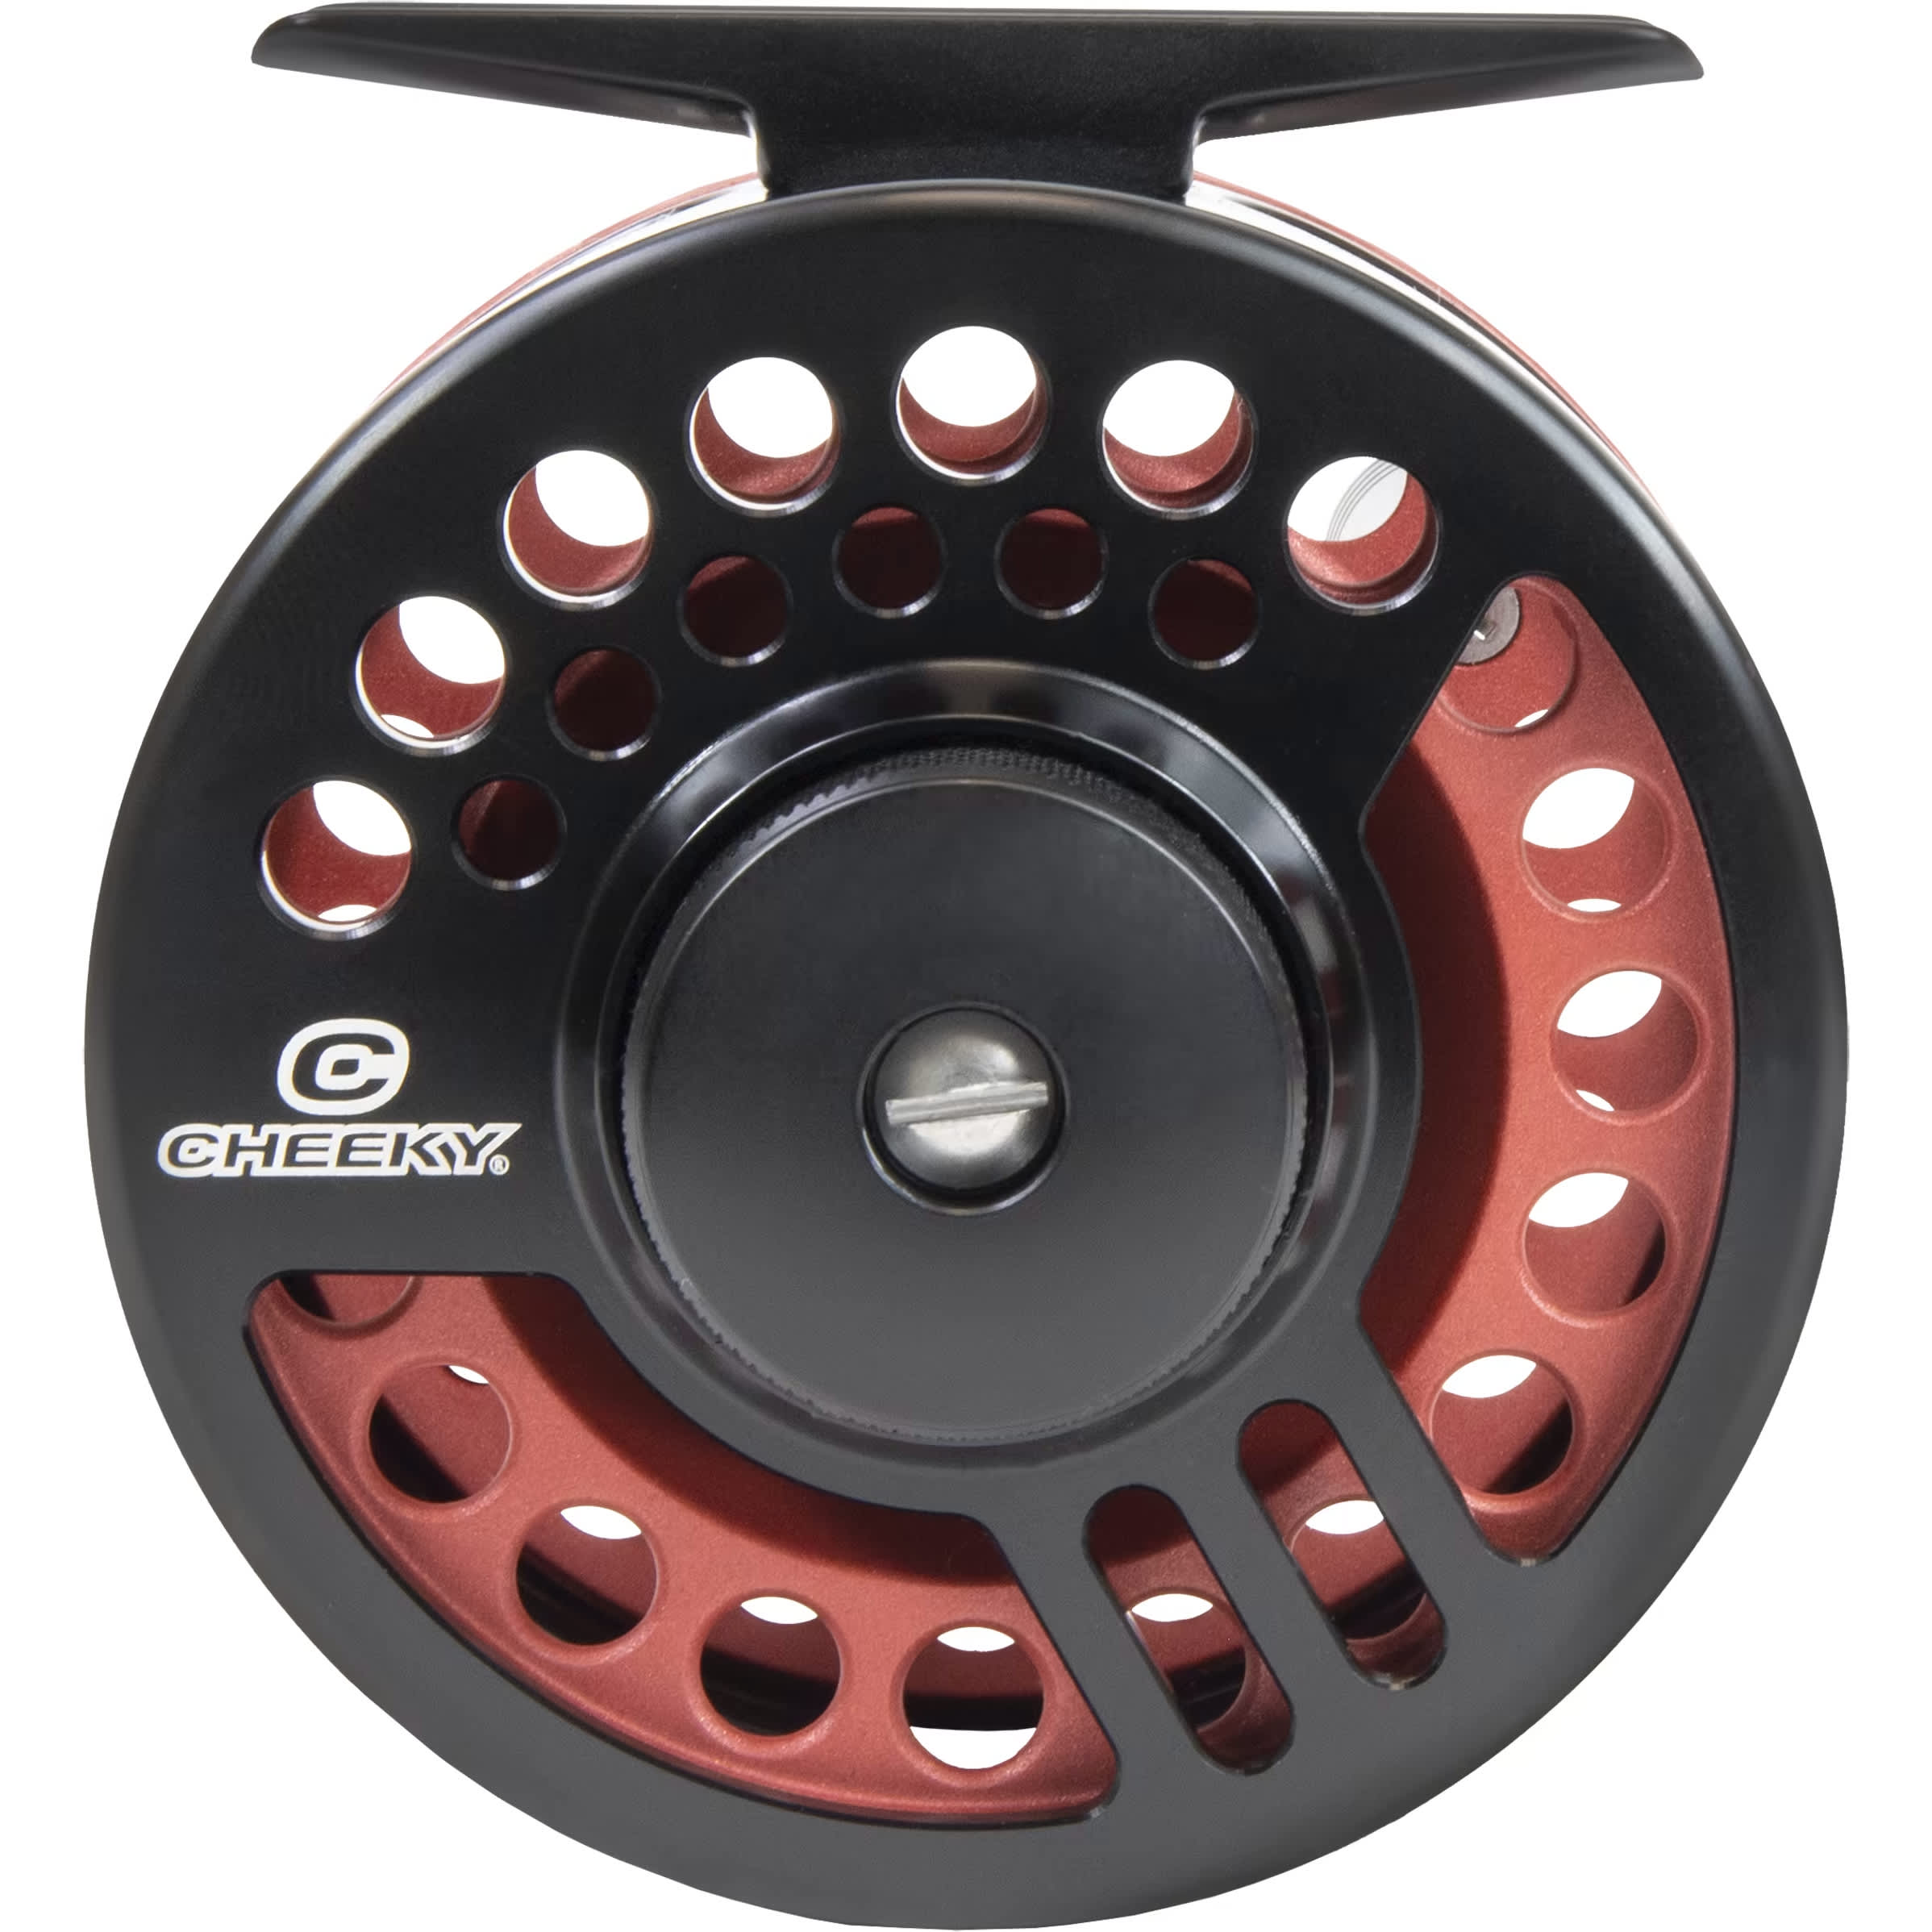 Cheeky® Sighter Fly Reel